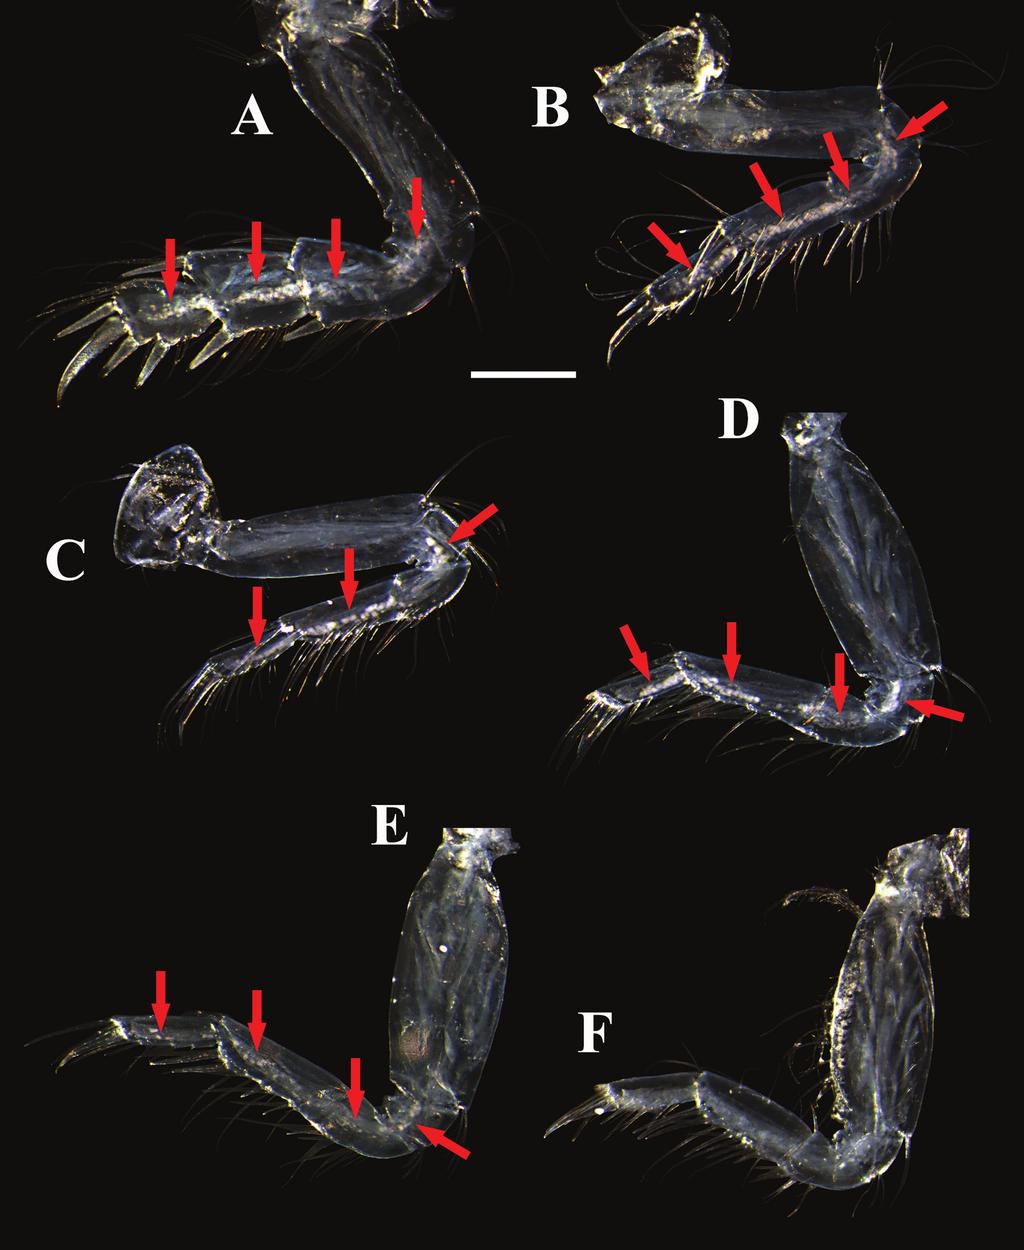 430 Morales-Núñez, A.G. et al.: New parapseudid from Hawai i Island Figure 11. Digital images of Brachylicoa lui sp. n. paratype female with oostegites and genital cone (dissected). A F pereopod 1 6.